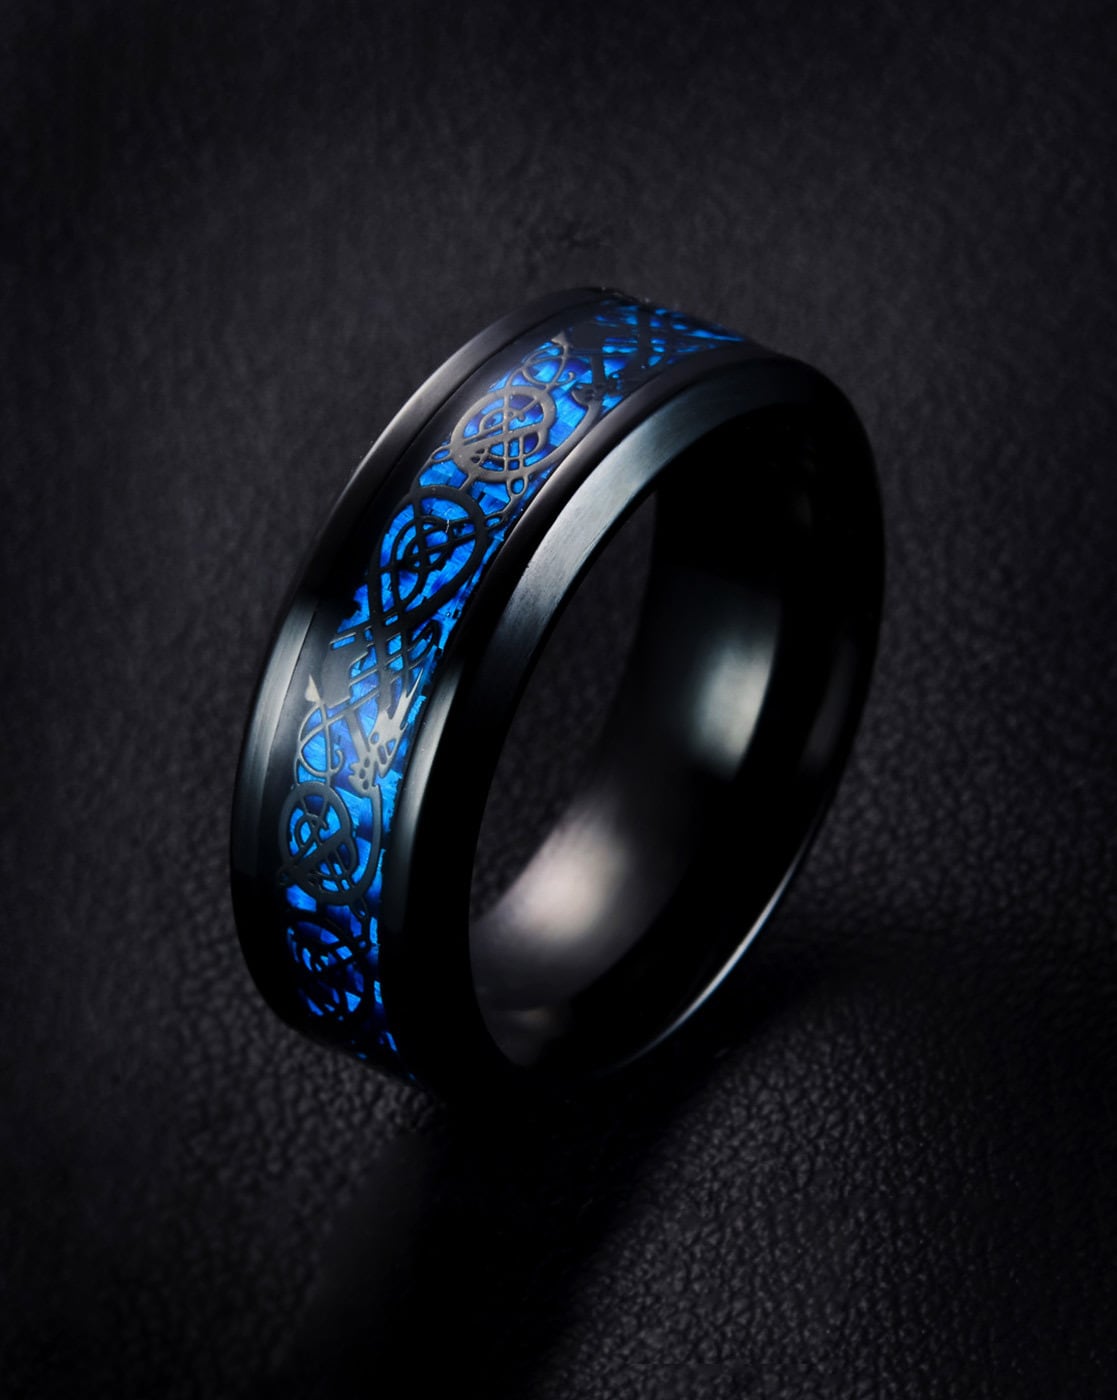 Skyrim Dragon Ring Silver 925 (for men or women) ⋆ Buy online - $179.00 |  Sterling silver jewelry rings, Rings, Dragon ring